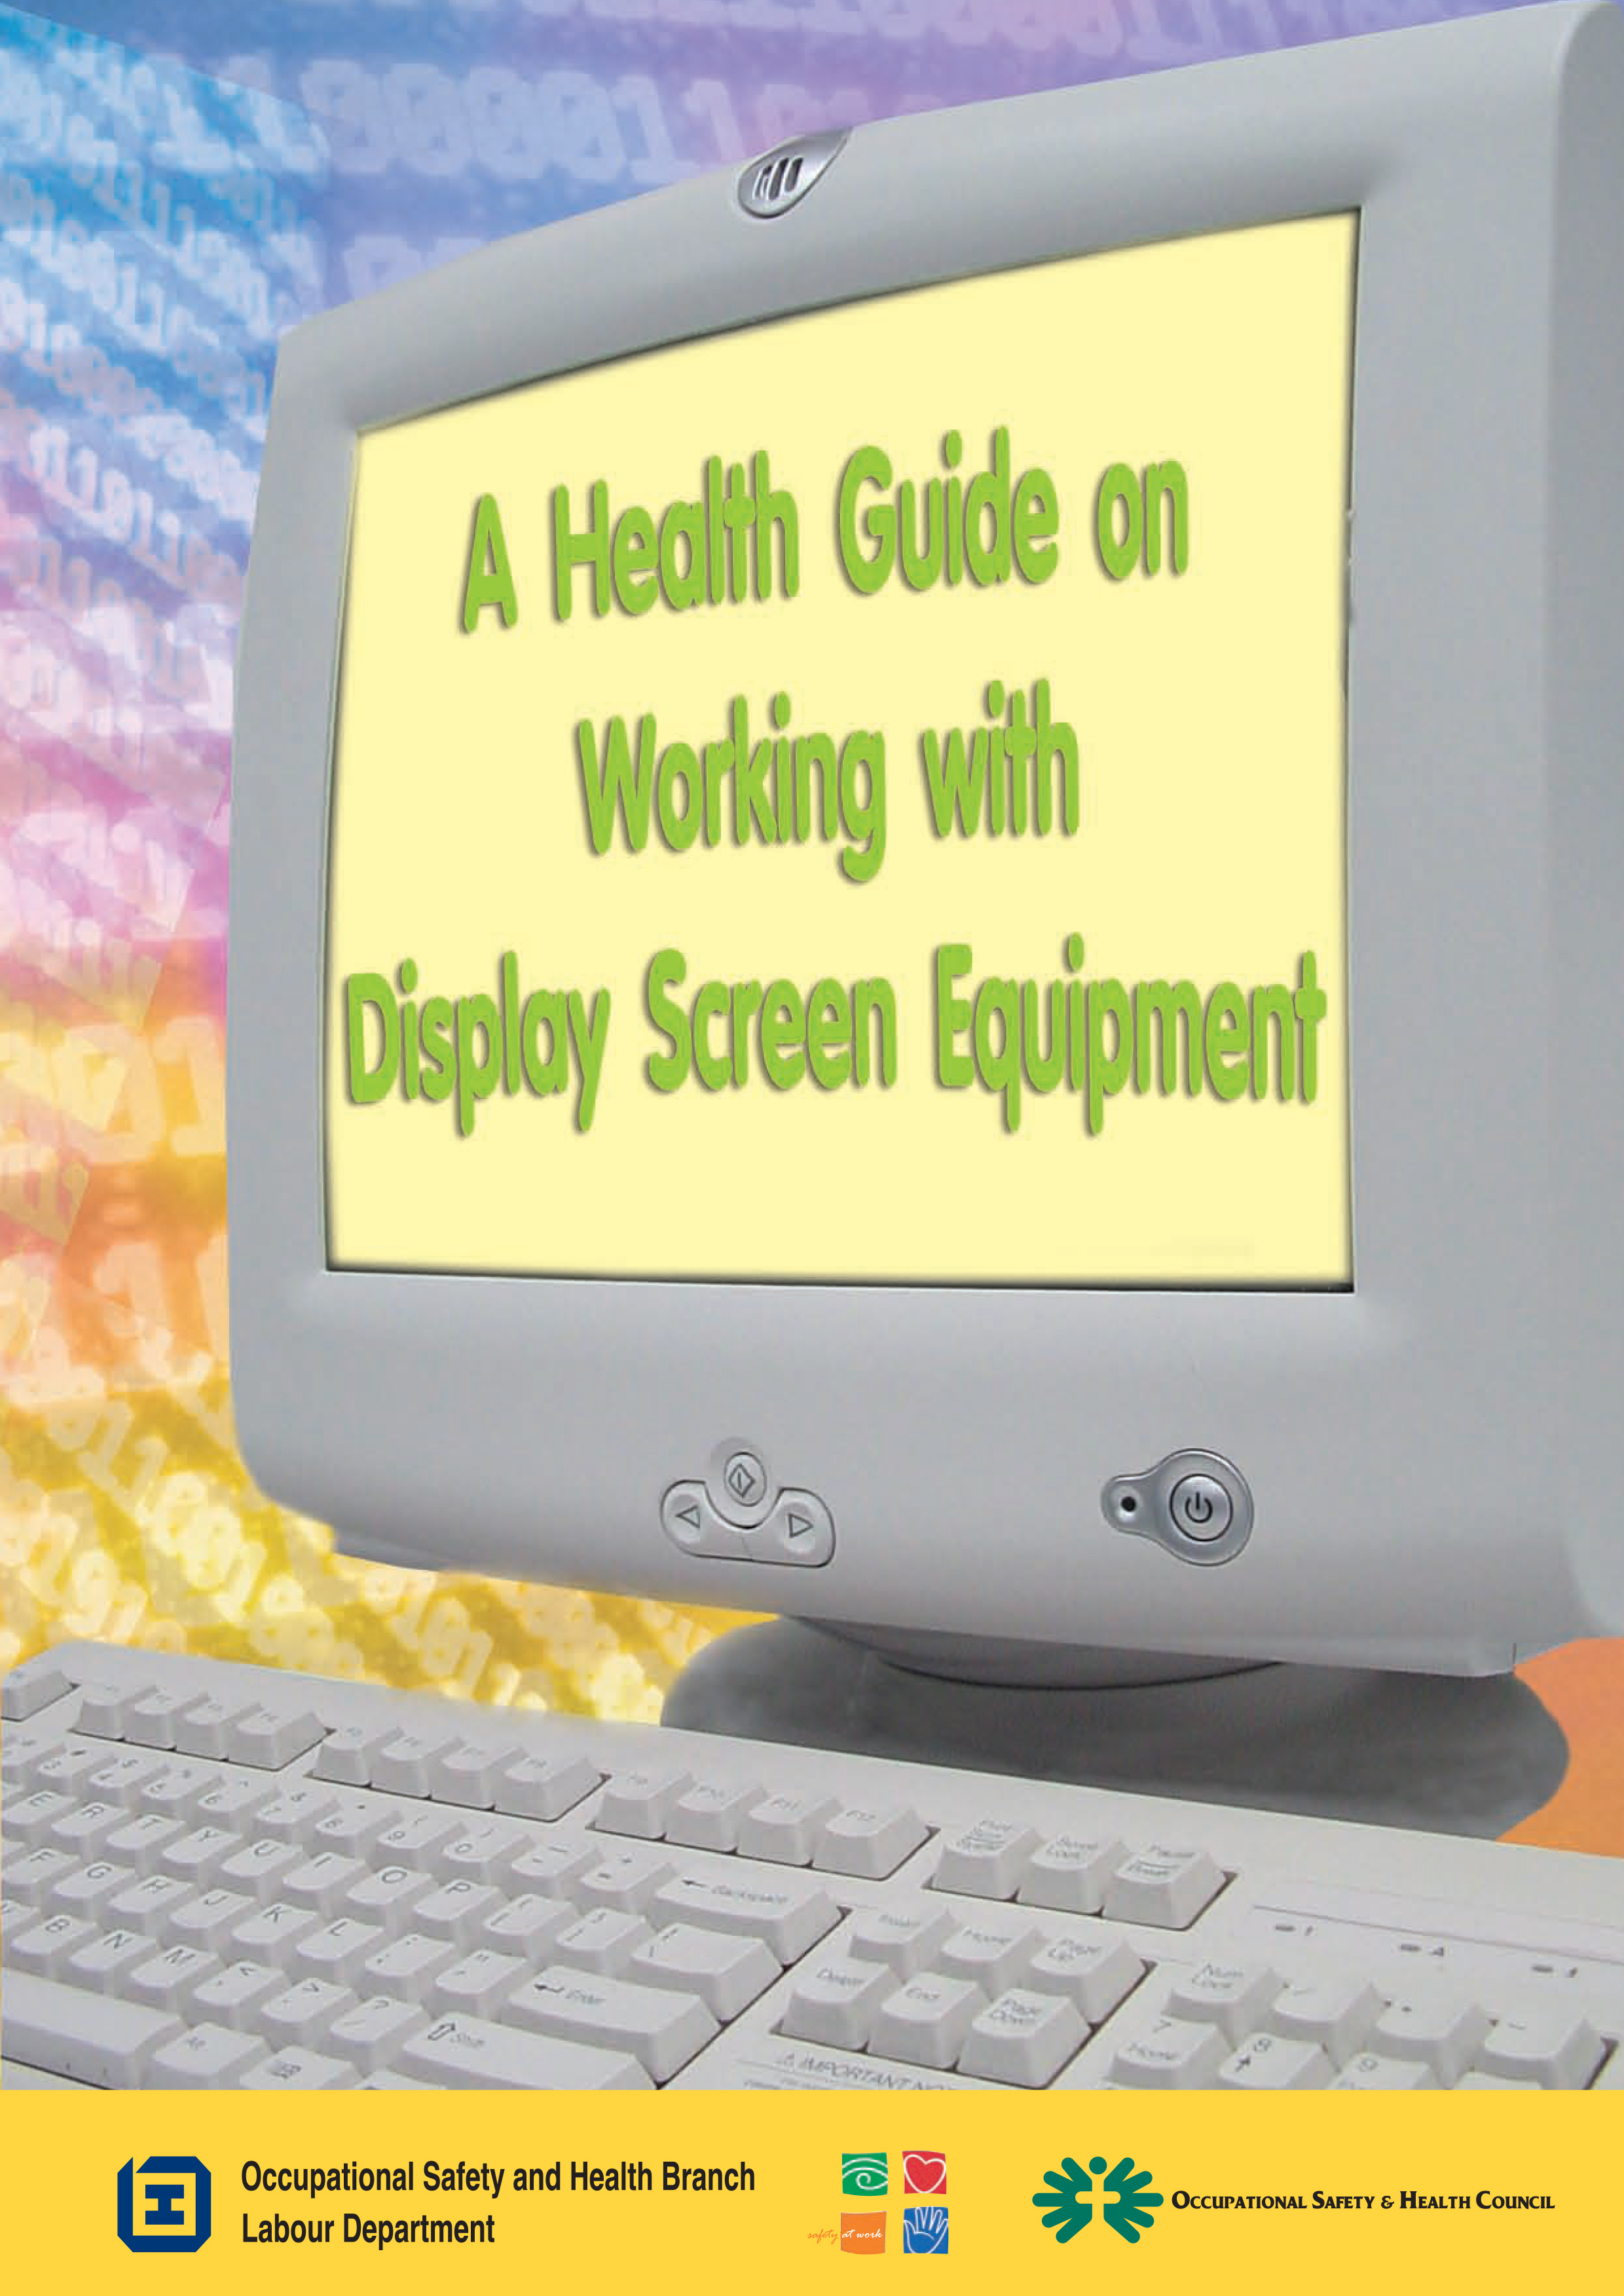 A Health Guide on Working with Display Screen Equipment (published by the Labour Department)